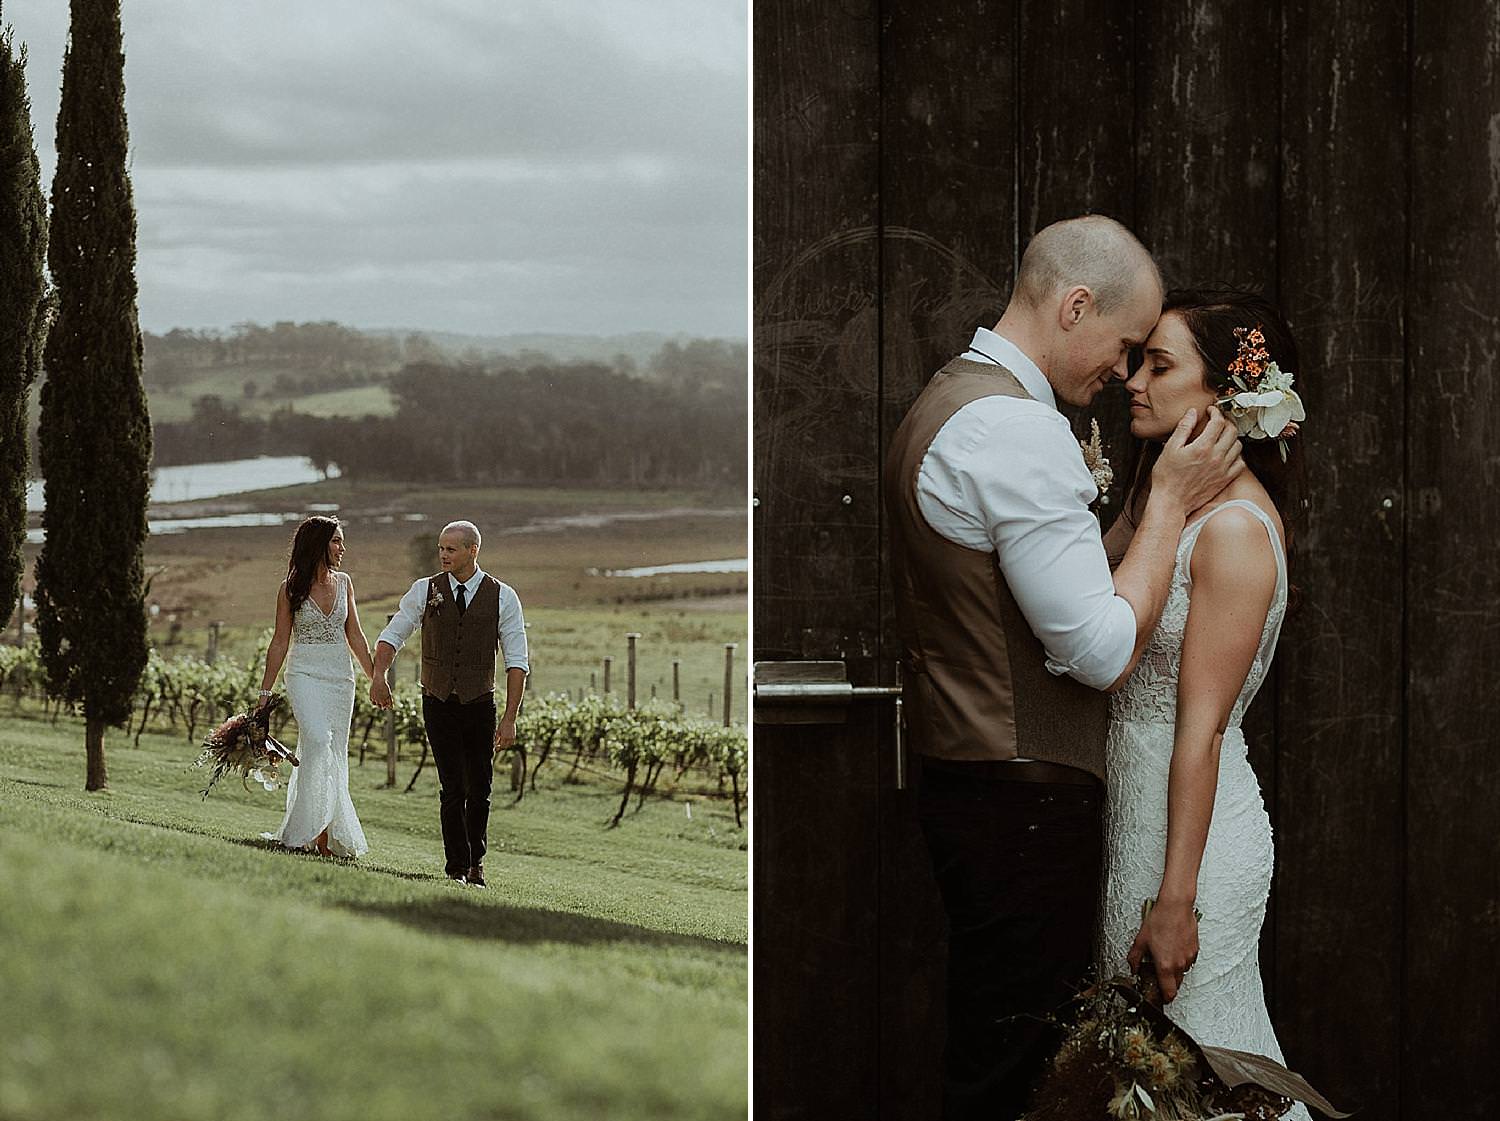 cupitts-winery-wedding-south-coast